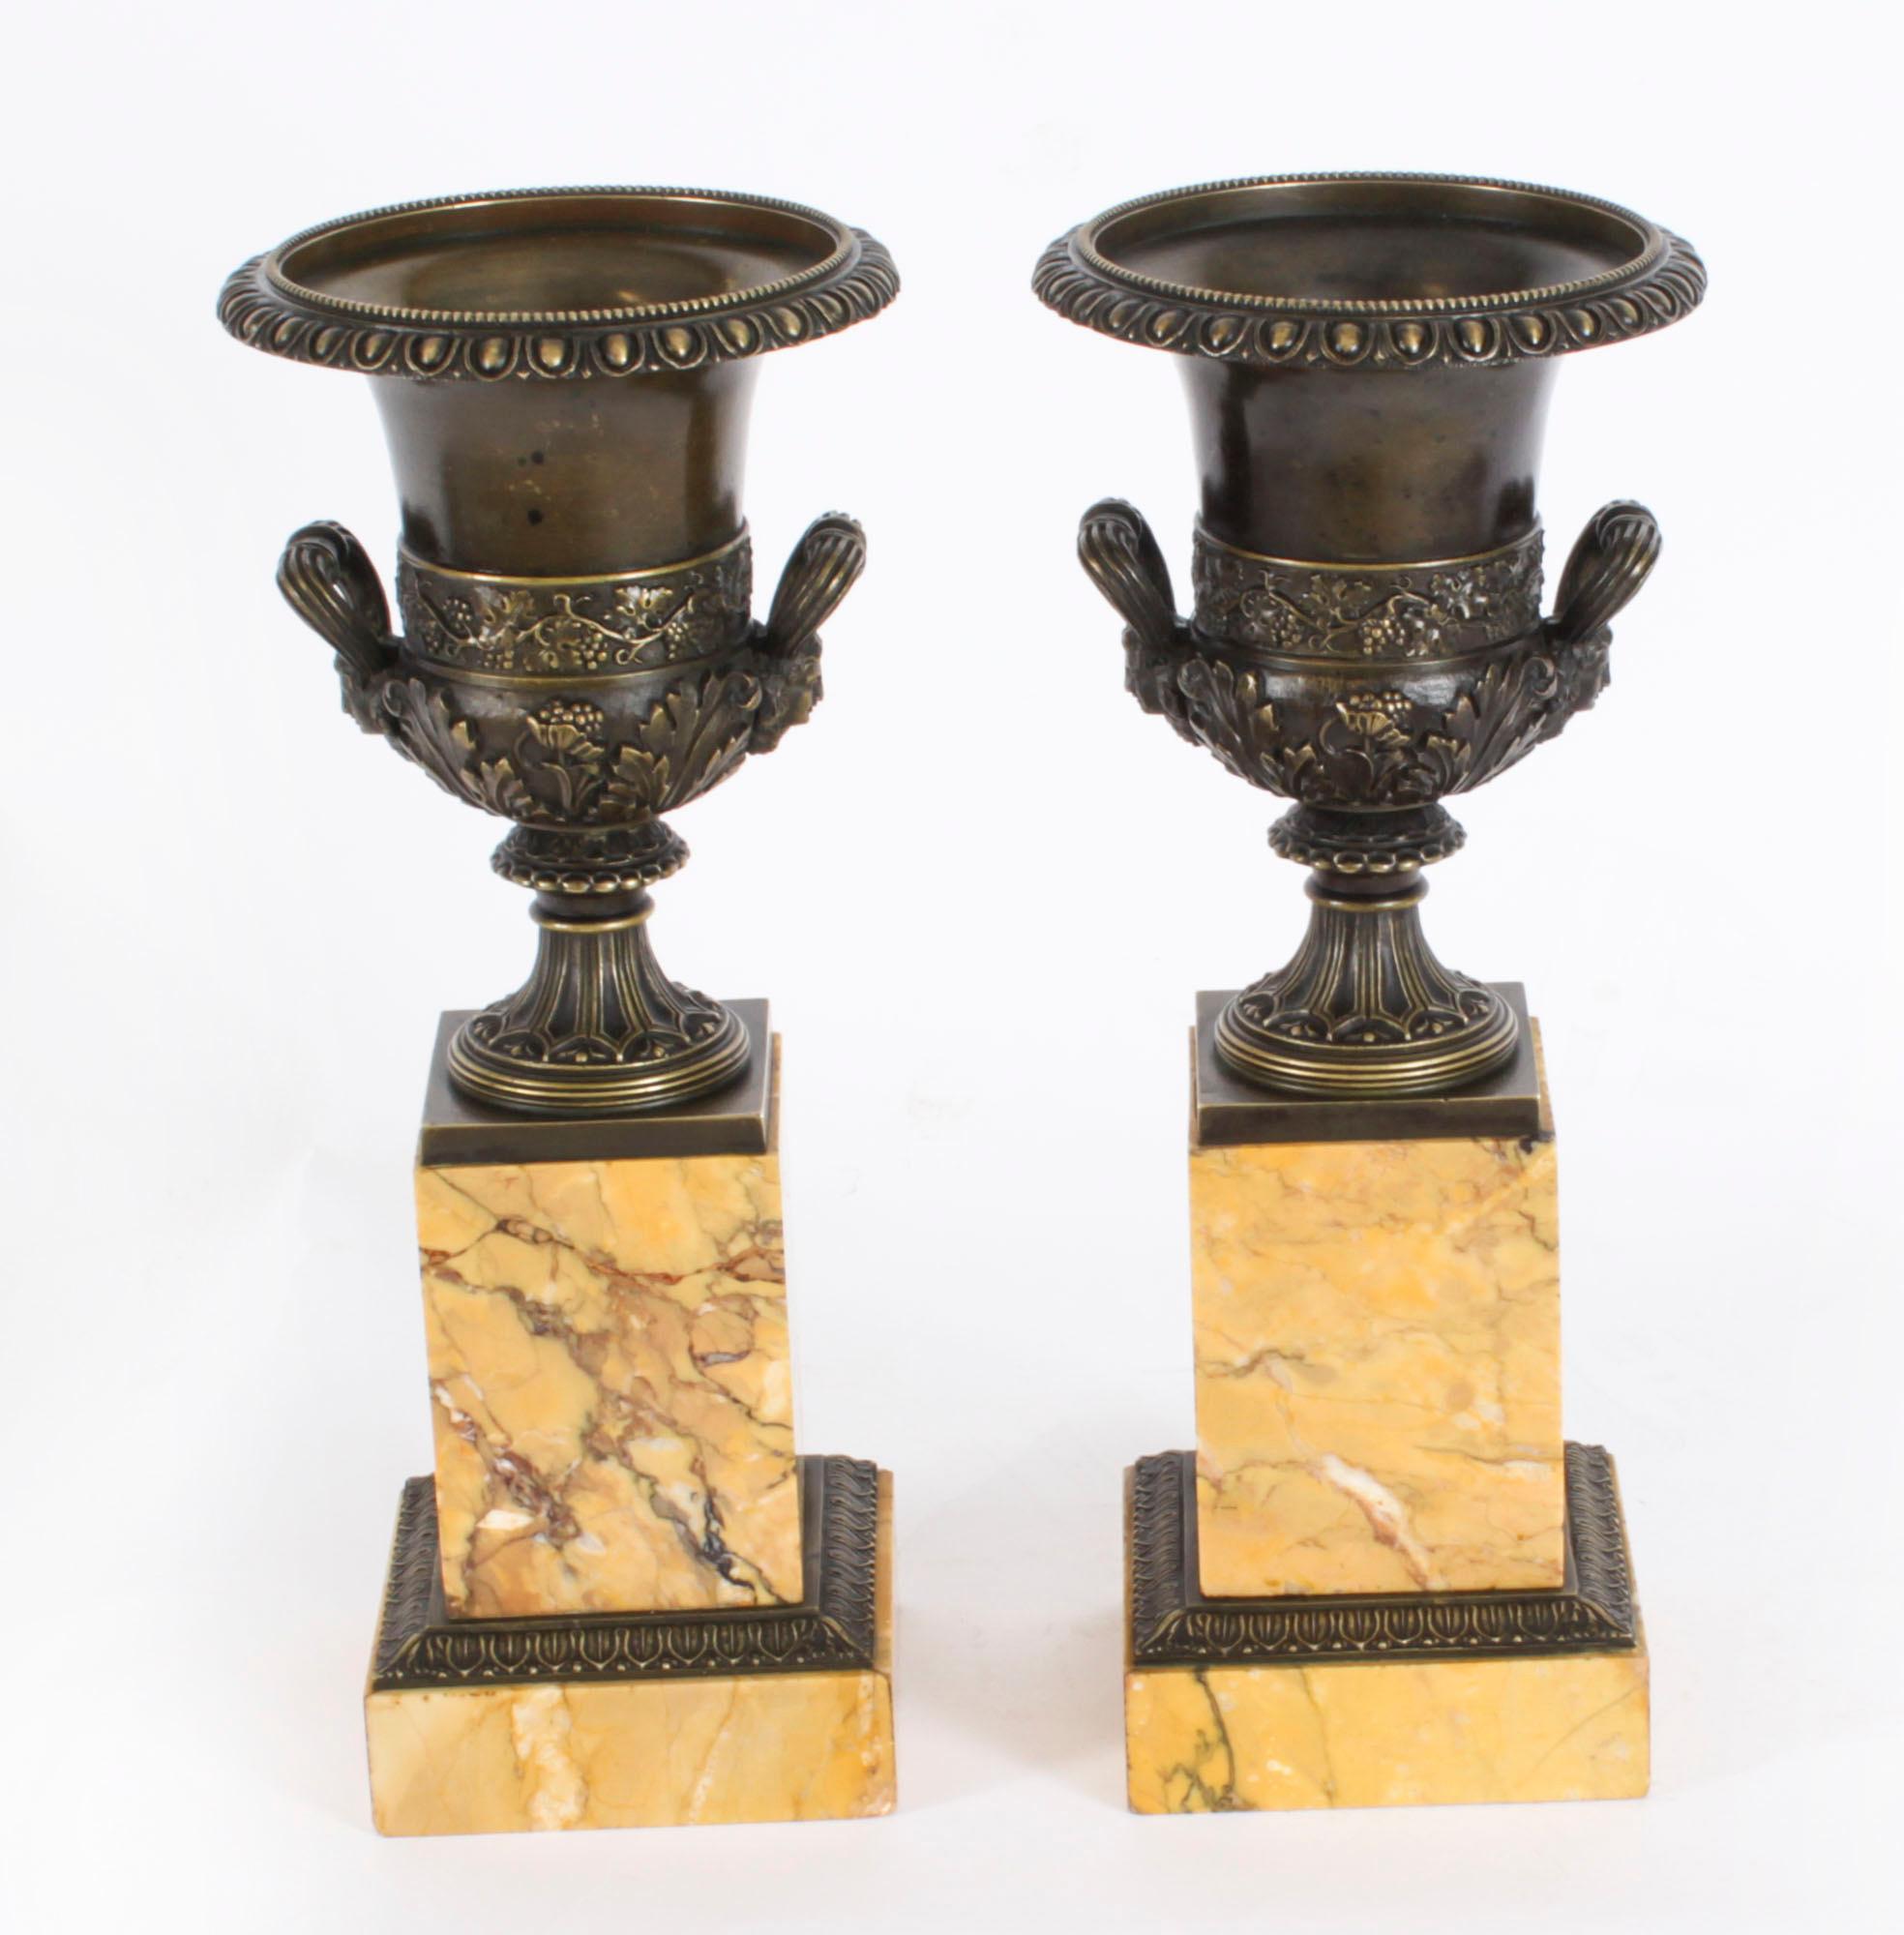 A superb antique pair of Grand Tour bronze and Siena marble Borghese Campana urns, circa 1870 in date.

This pair of patinated  bronze campana urns are after the Borghese models with classical  relief decoration with beaded rims on a pedestal base